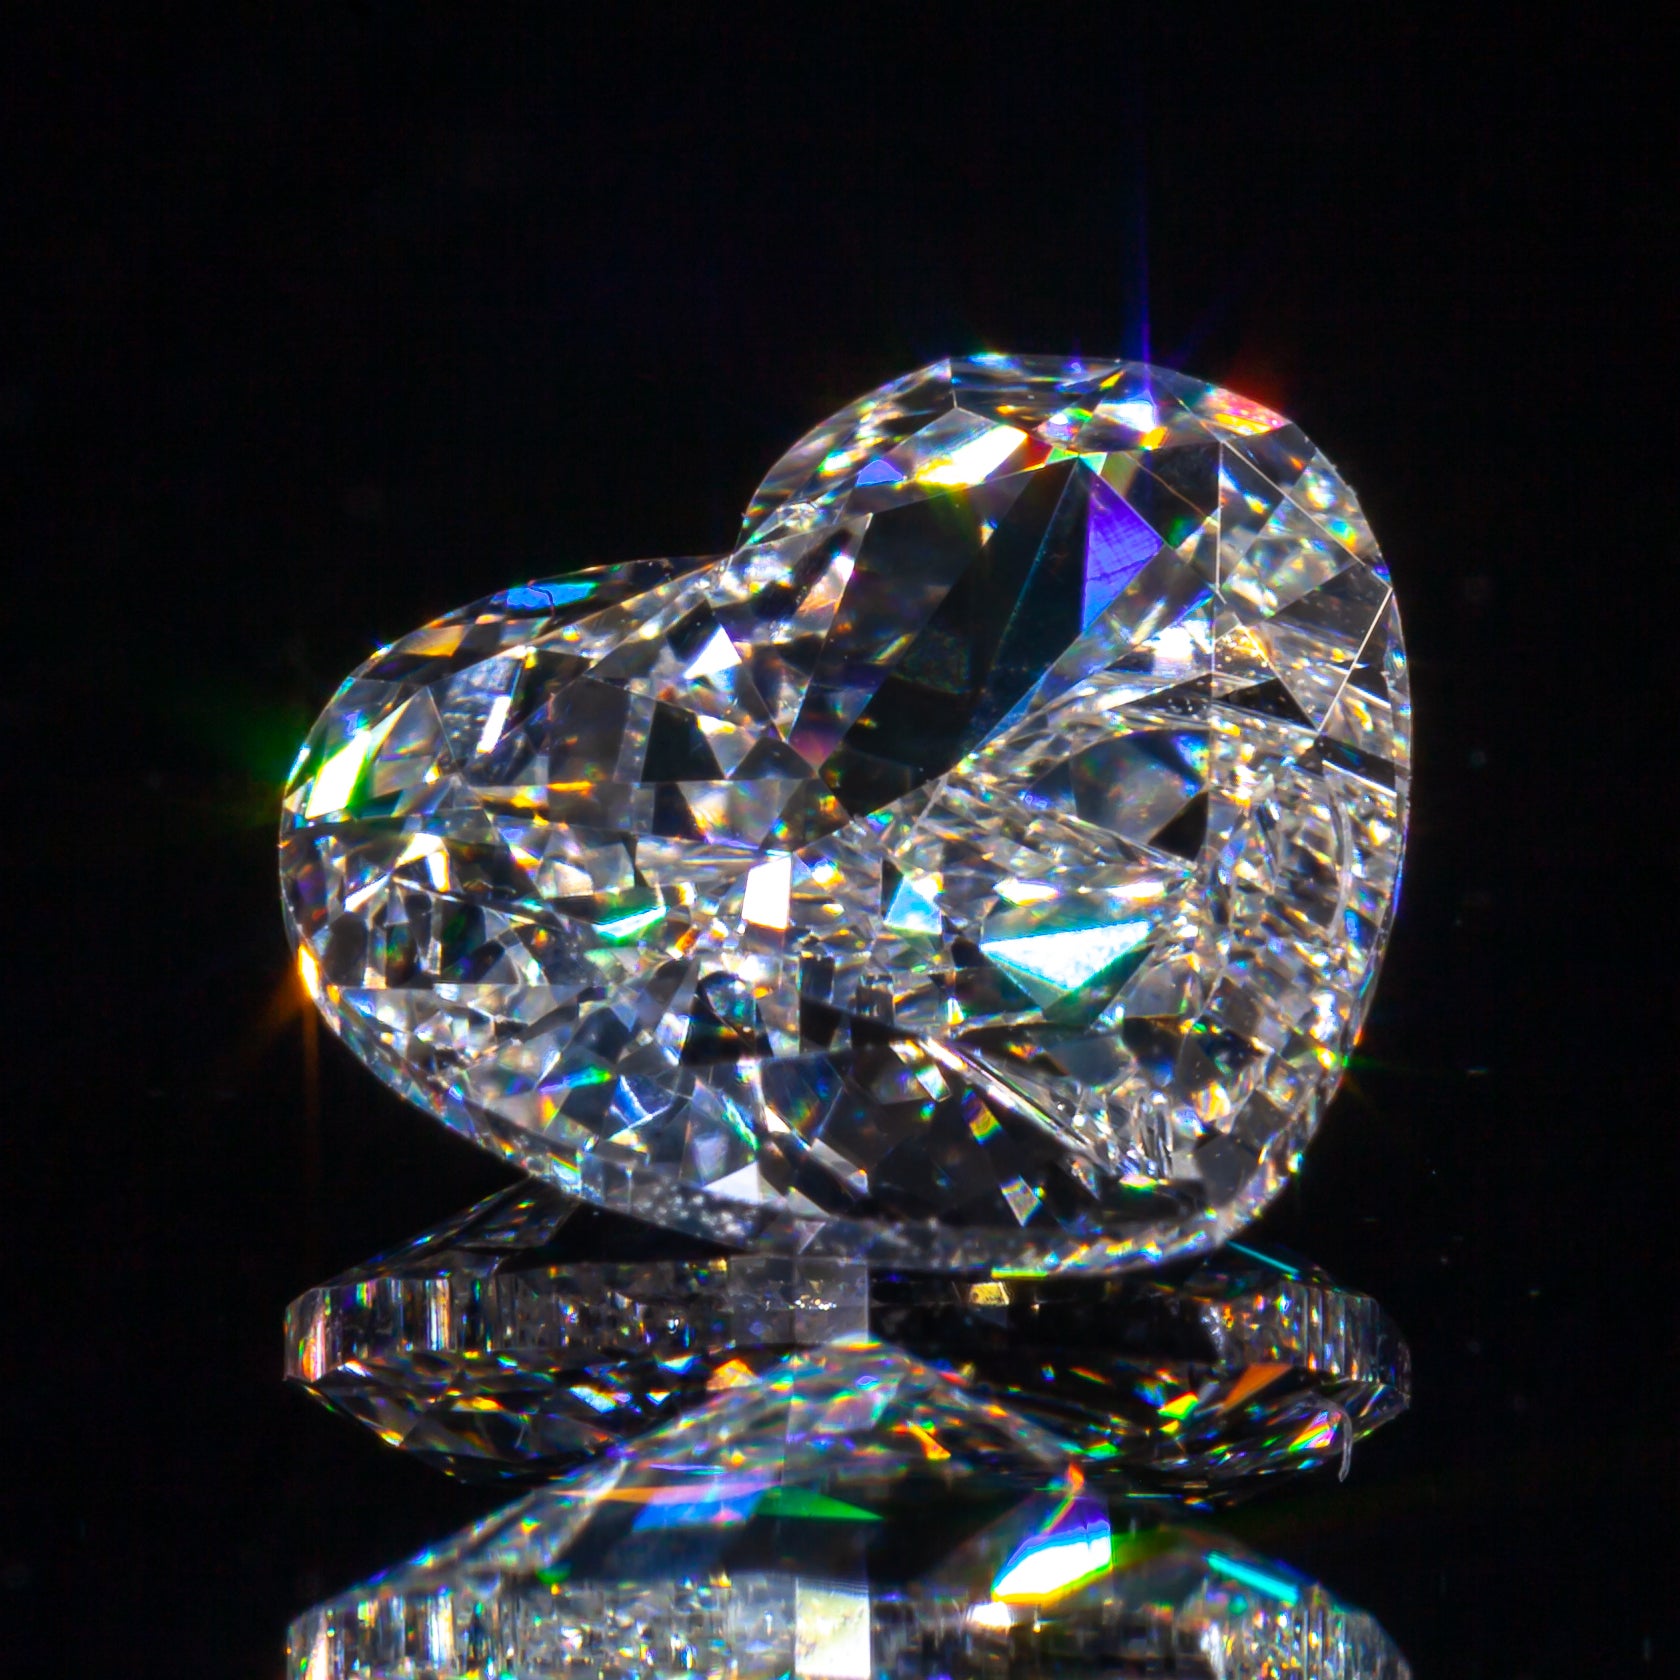 1.00 Carat Loose G / VS2 Heart Shaped Diamond GIA Certified

Diamond General Info
GIA Report Number: 5182448120
Diamond Cut: Heart Modified Brilliant
Measurements: 6.66 x 7.42 x 3.03 mm

Diamond Grading Results
Carat Weight: 1.00
Color Grade: